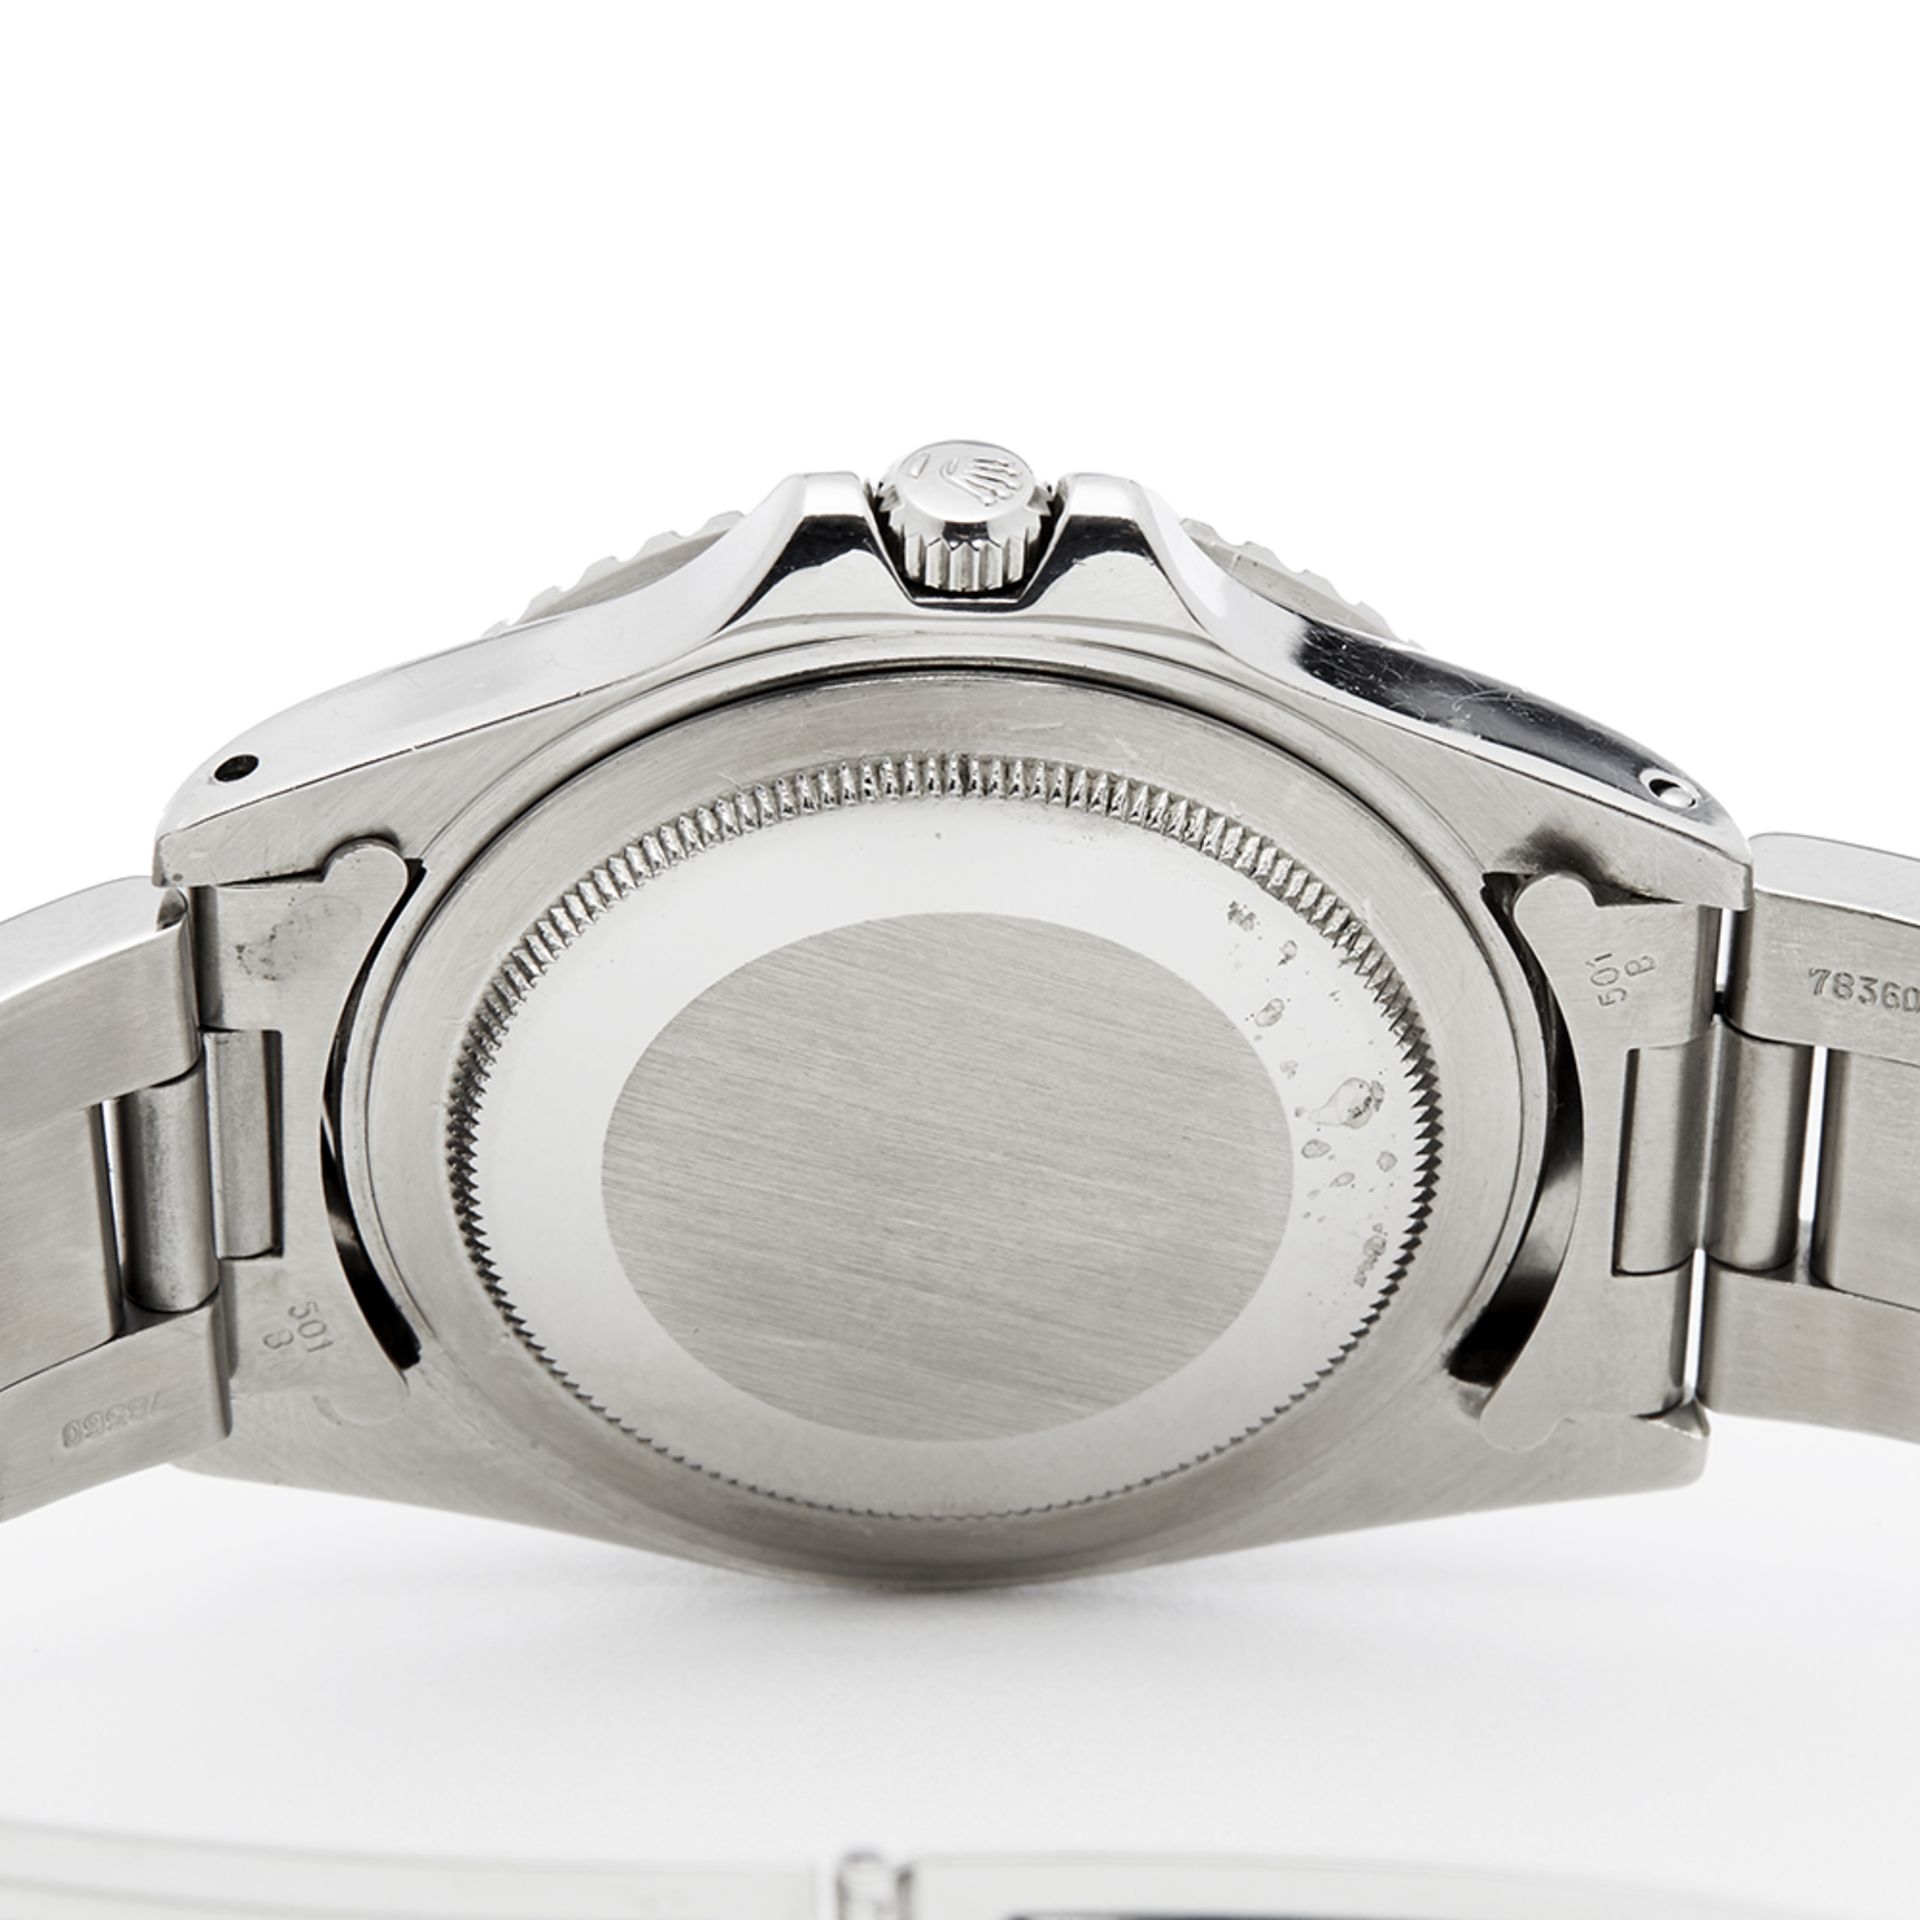 GMT-Master Radial Dial Stainless Steel - 1675 - Image 6 of 6